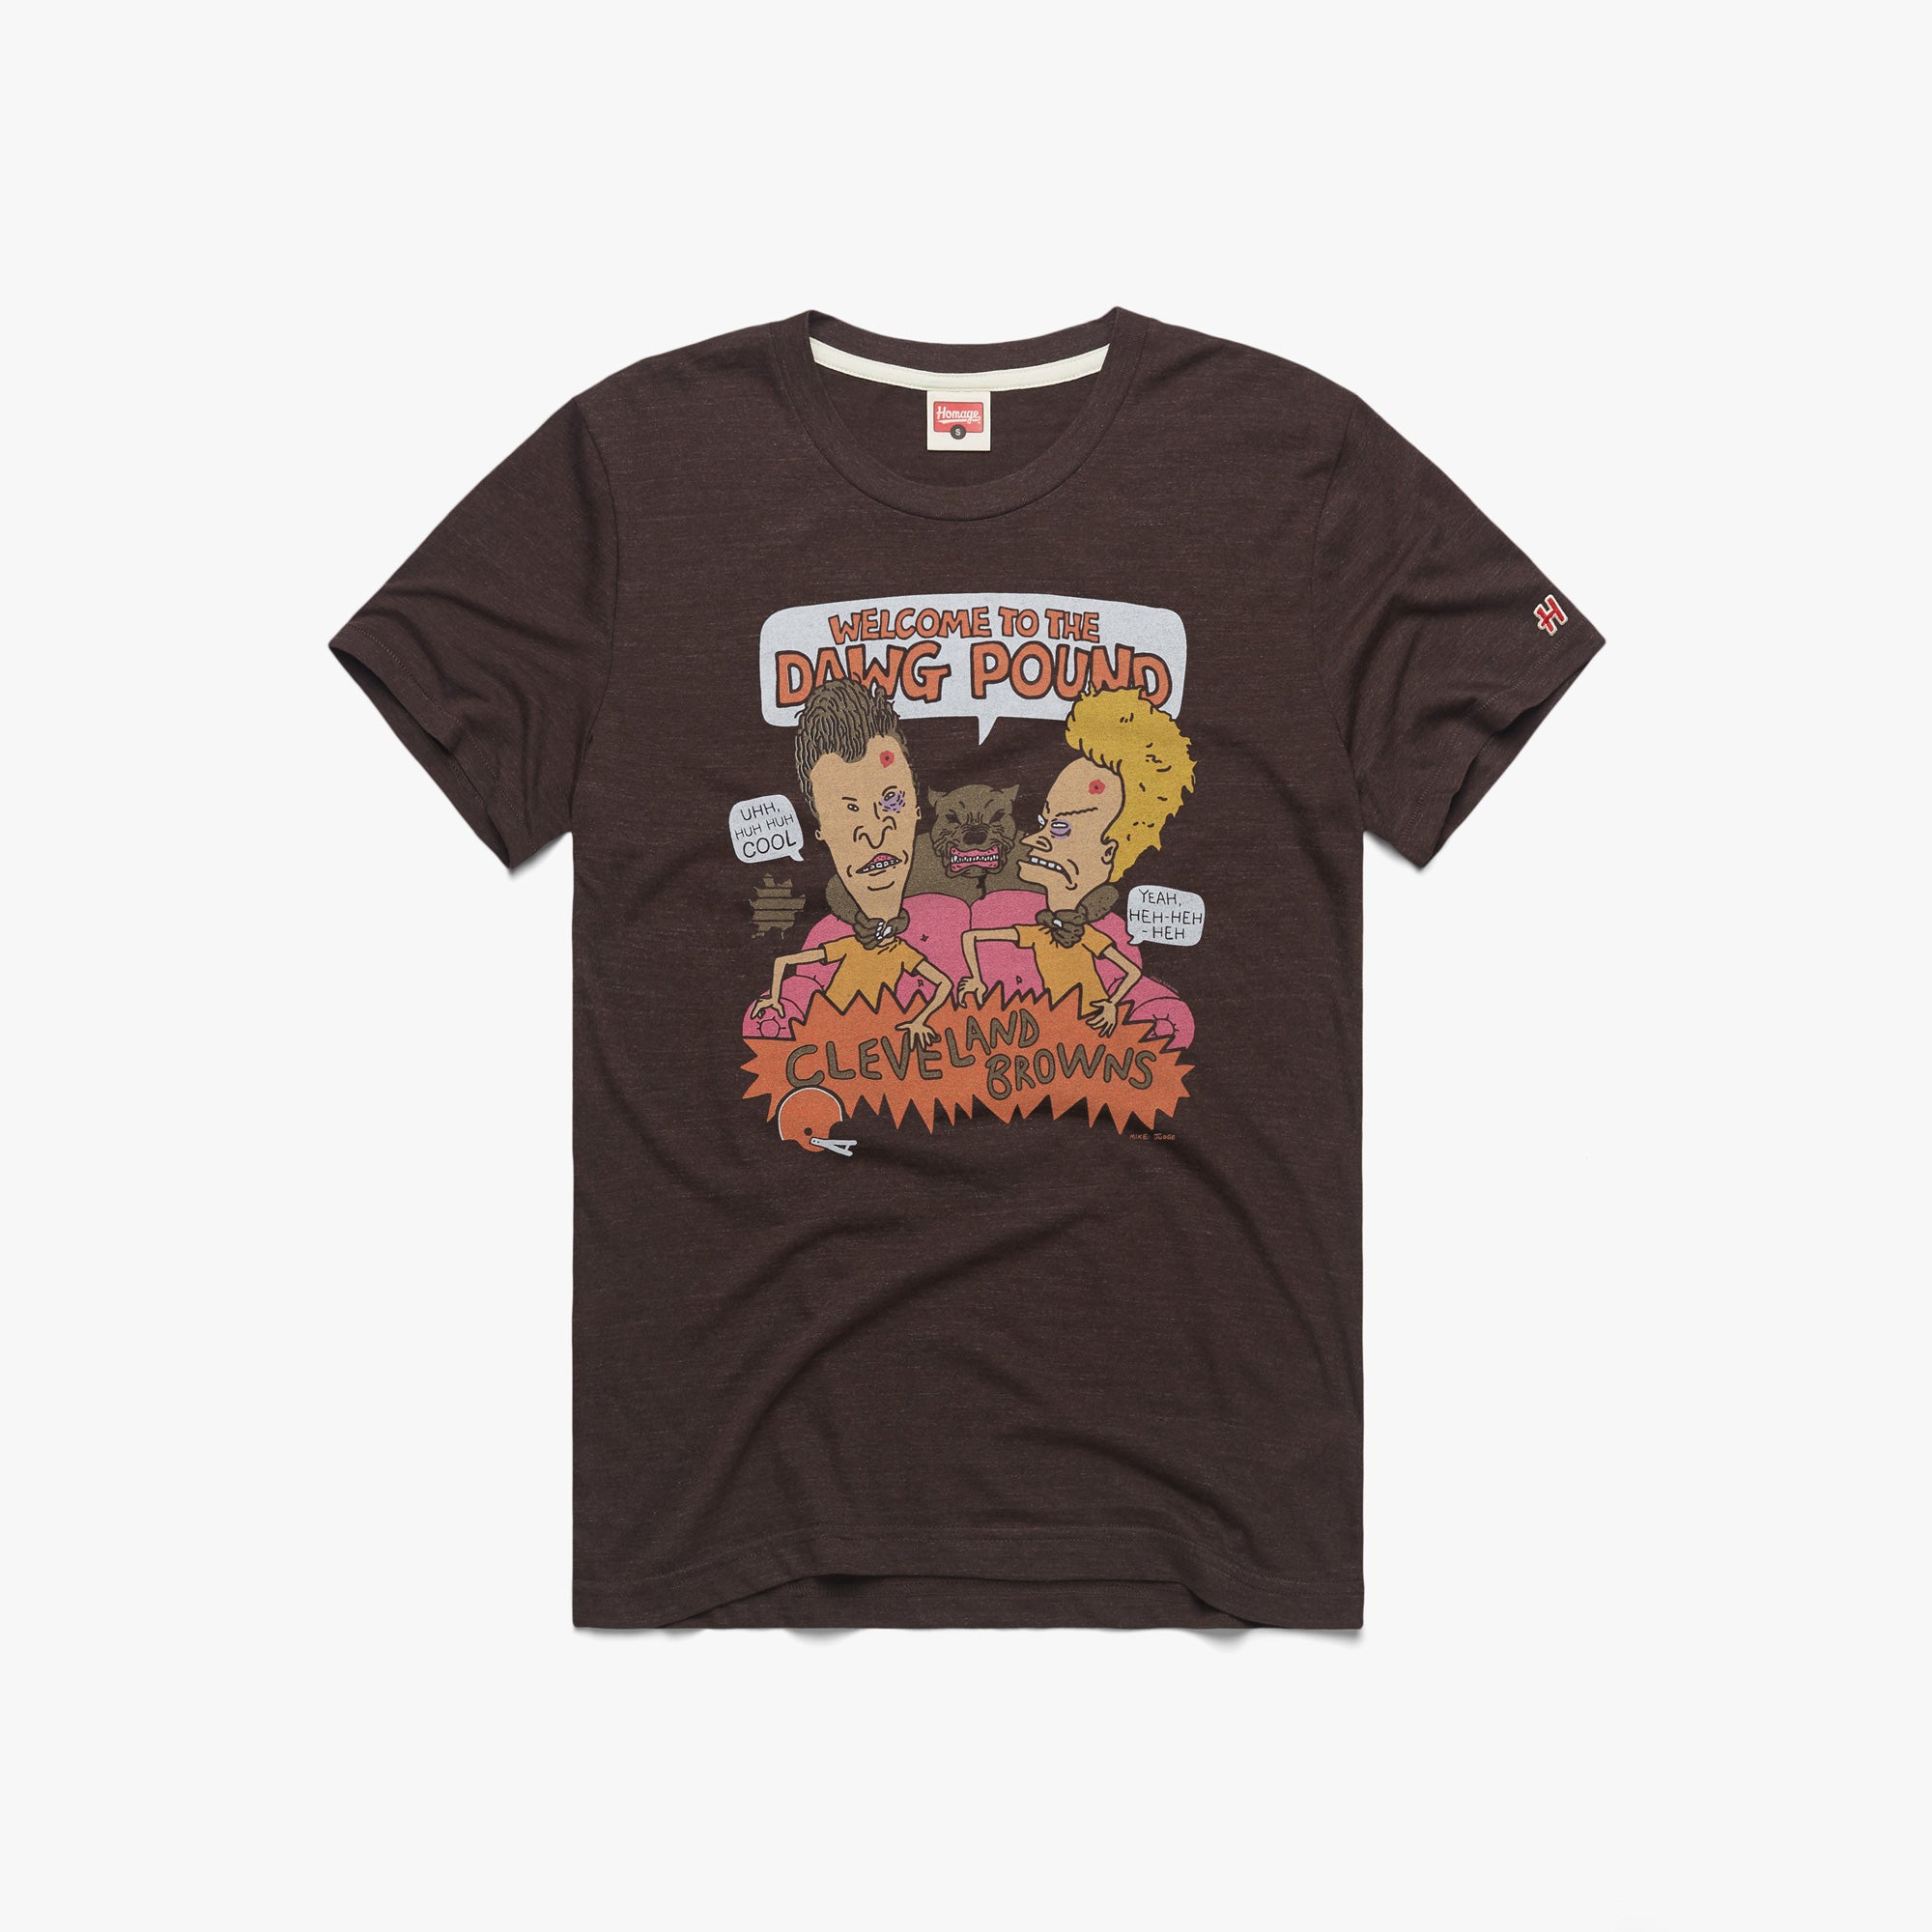 Beavis and Butthead x Cleveland Browns Dawg Pound T-Shirt from Homage. | Officially Licensed Vintage NFL Apparel from Homage Pro Shop.